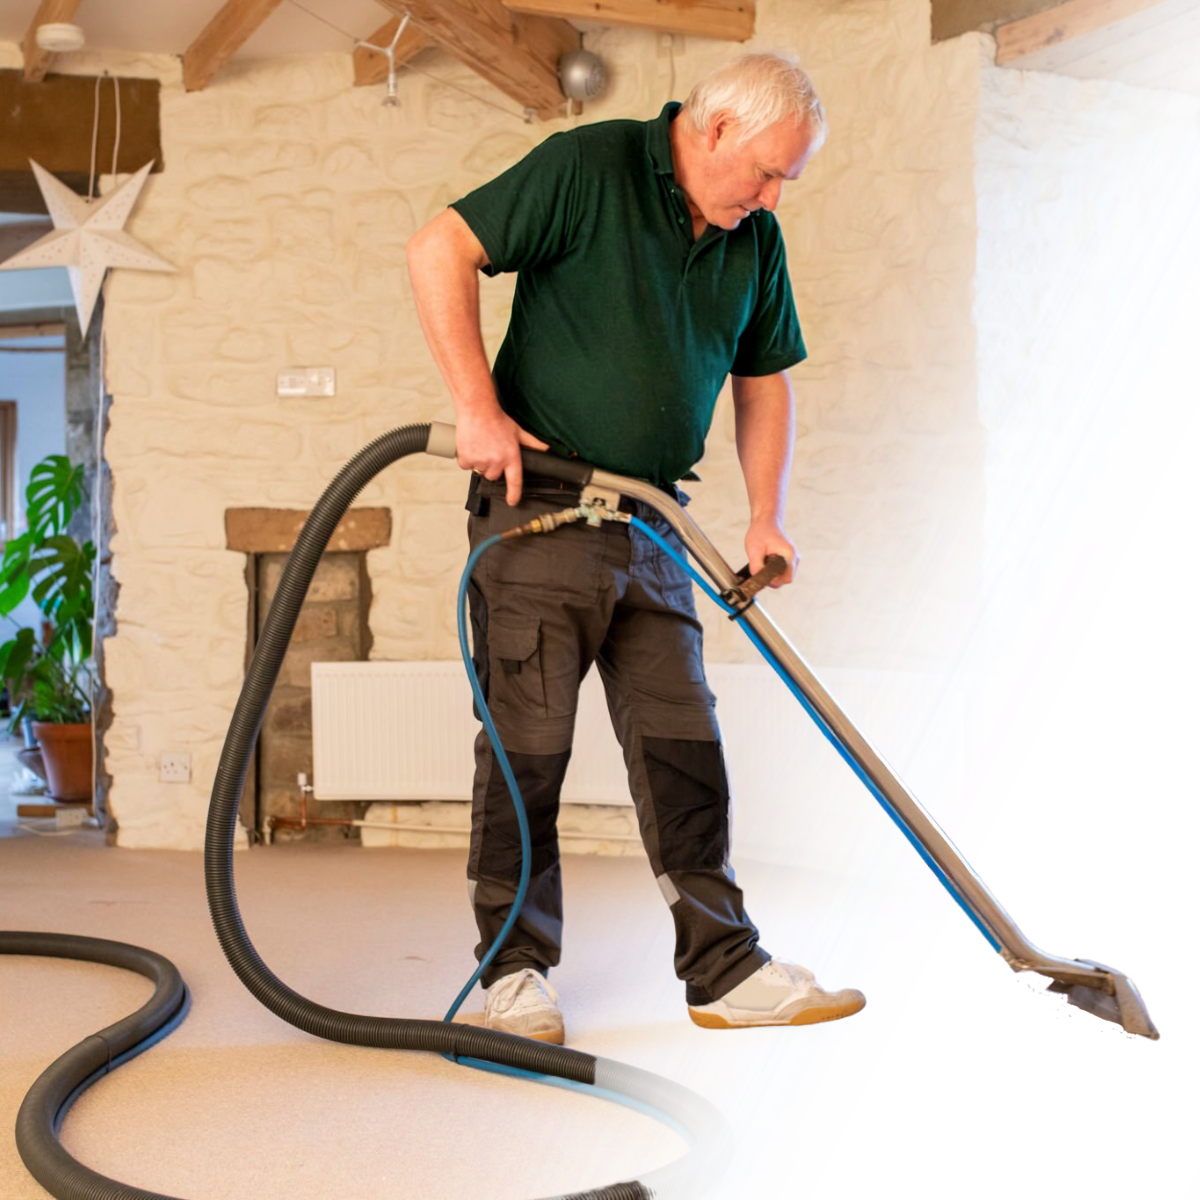 carpet cleaning manchester image 121